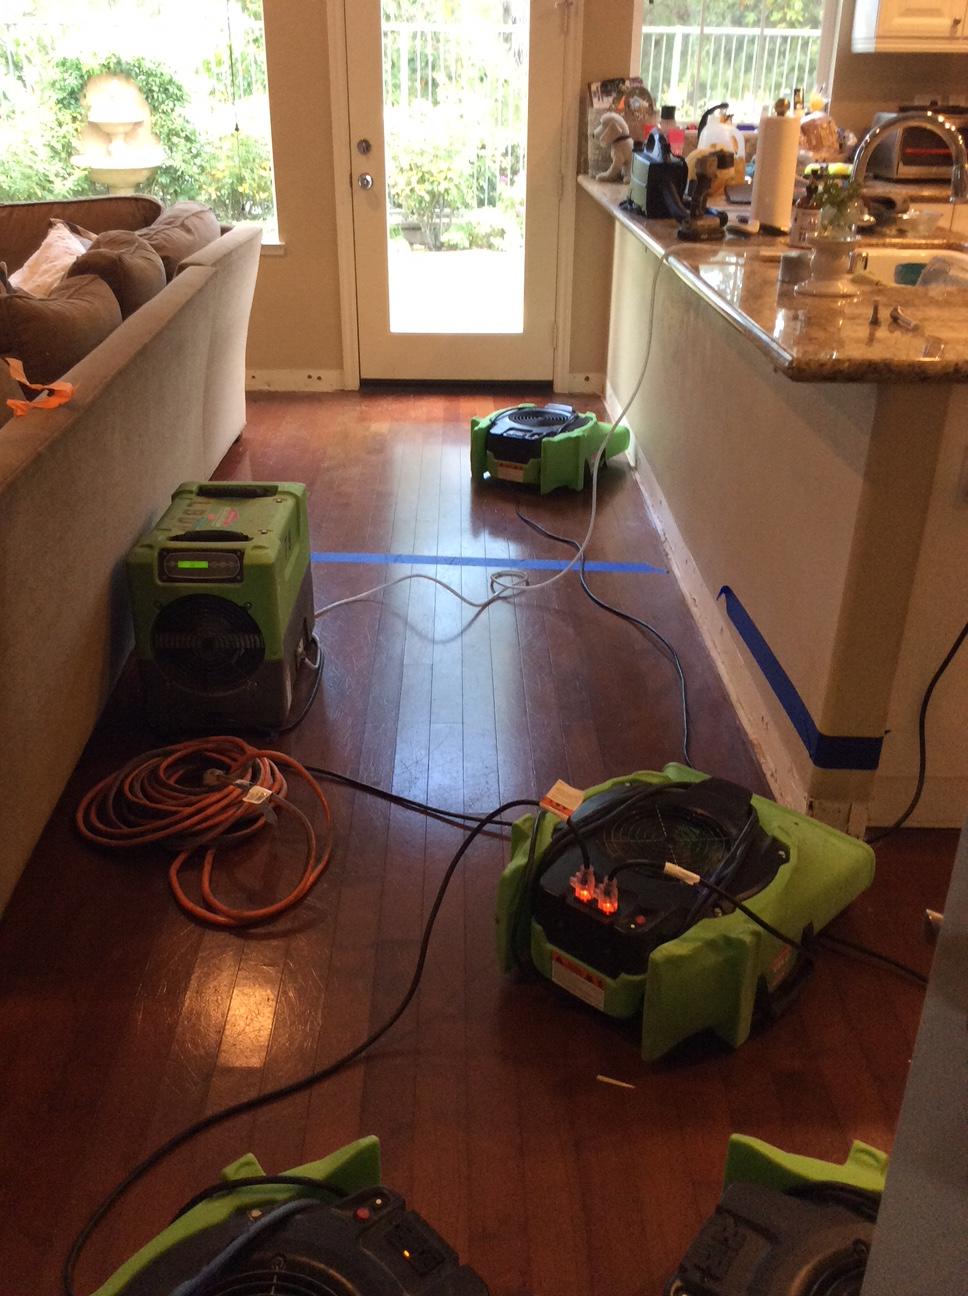 The SERVPRO equipment is up and running during a residential restoration!